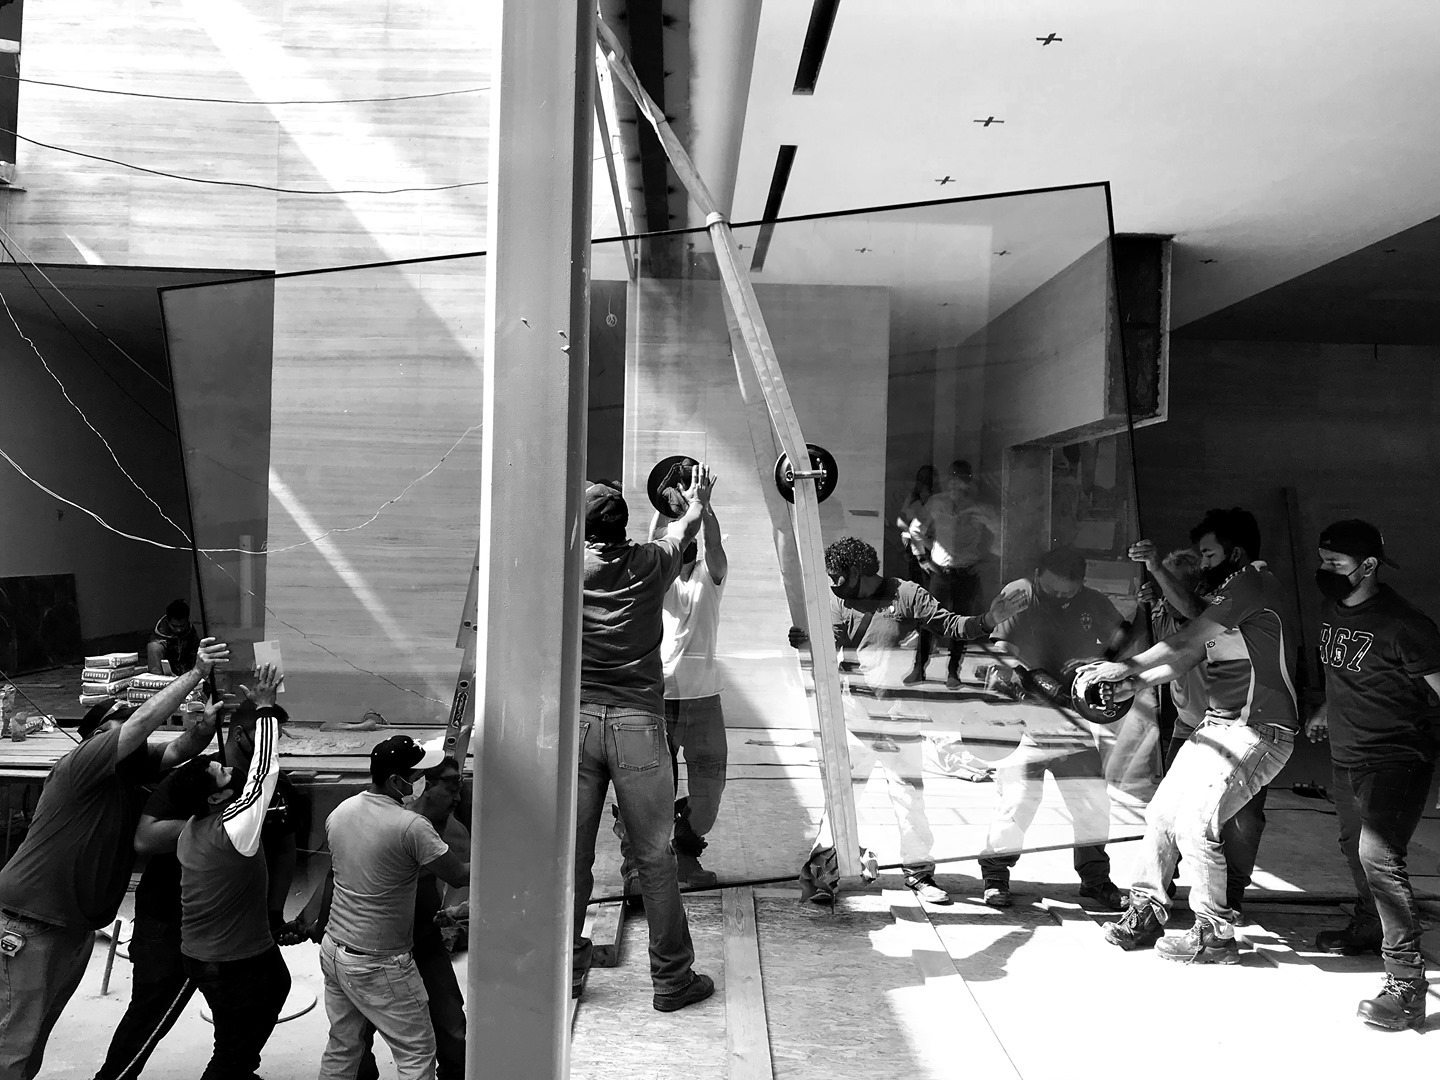 Monterrey Design R+D Adventures: How many guys does it take to install an oversized glazing panel? ⁠
⁠
Teamwork gets the job done!